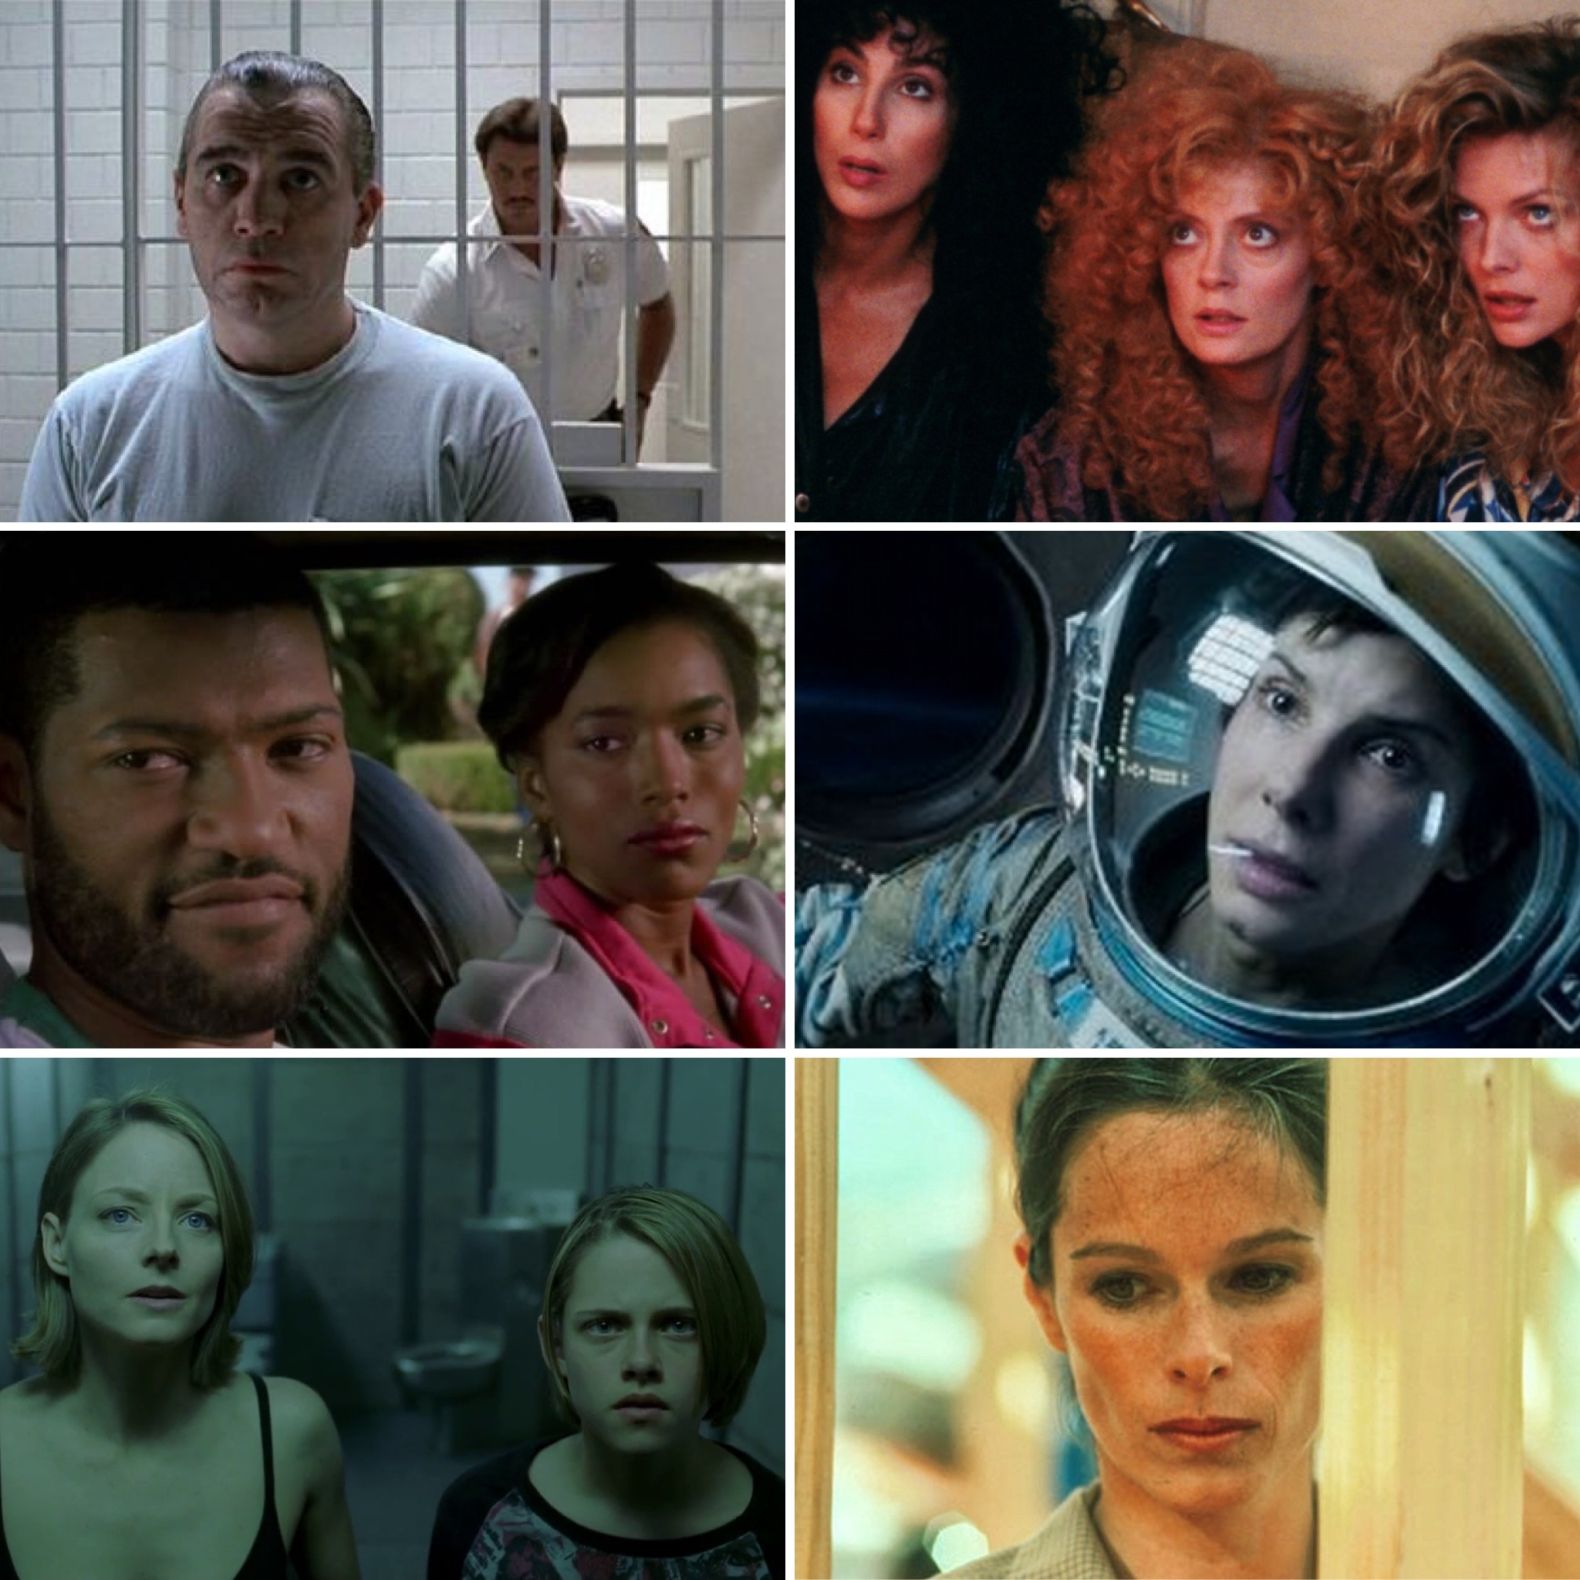 Duke Box #23: Our Guide to the Best Films on TV